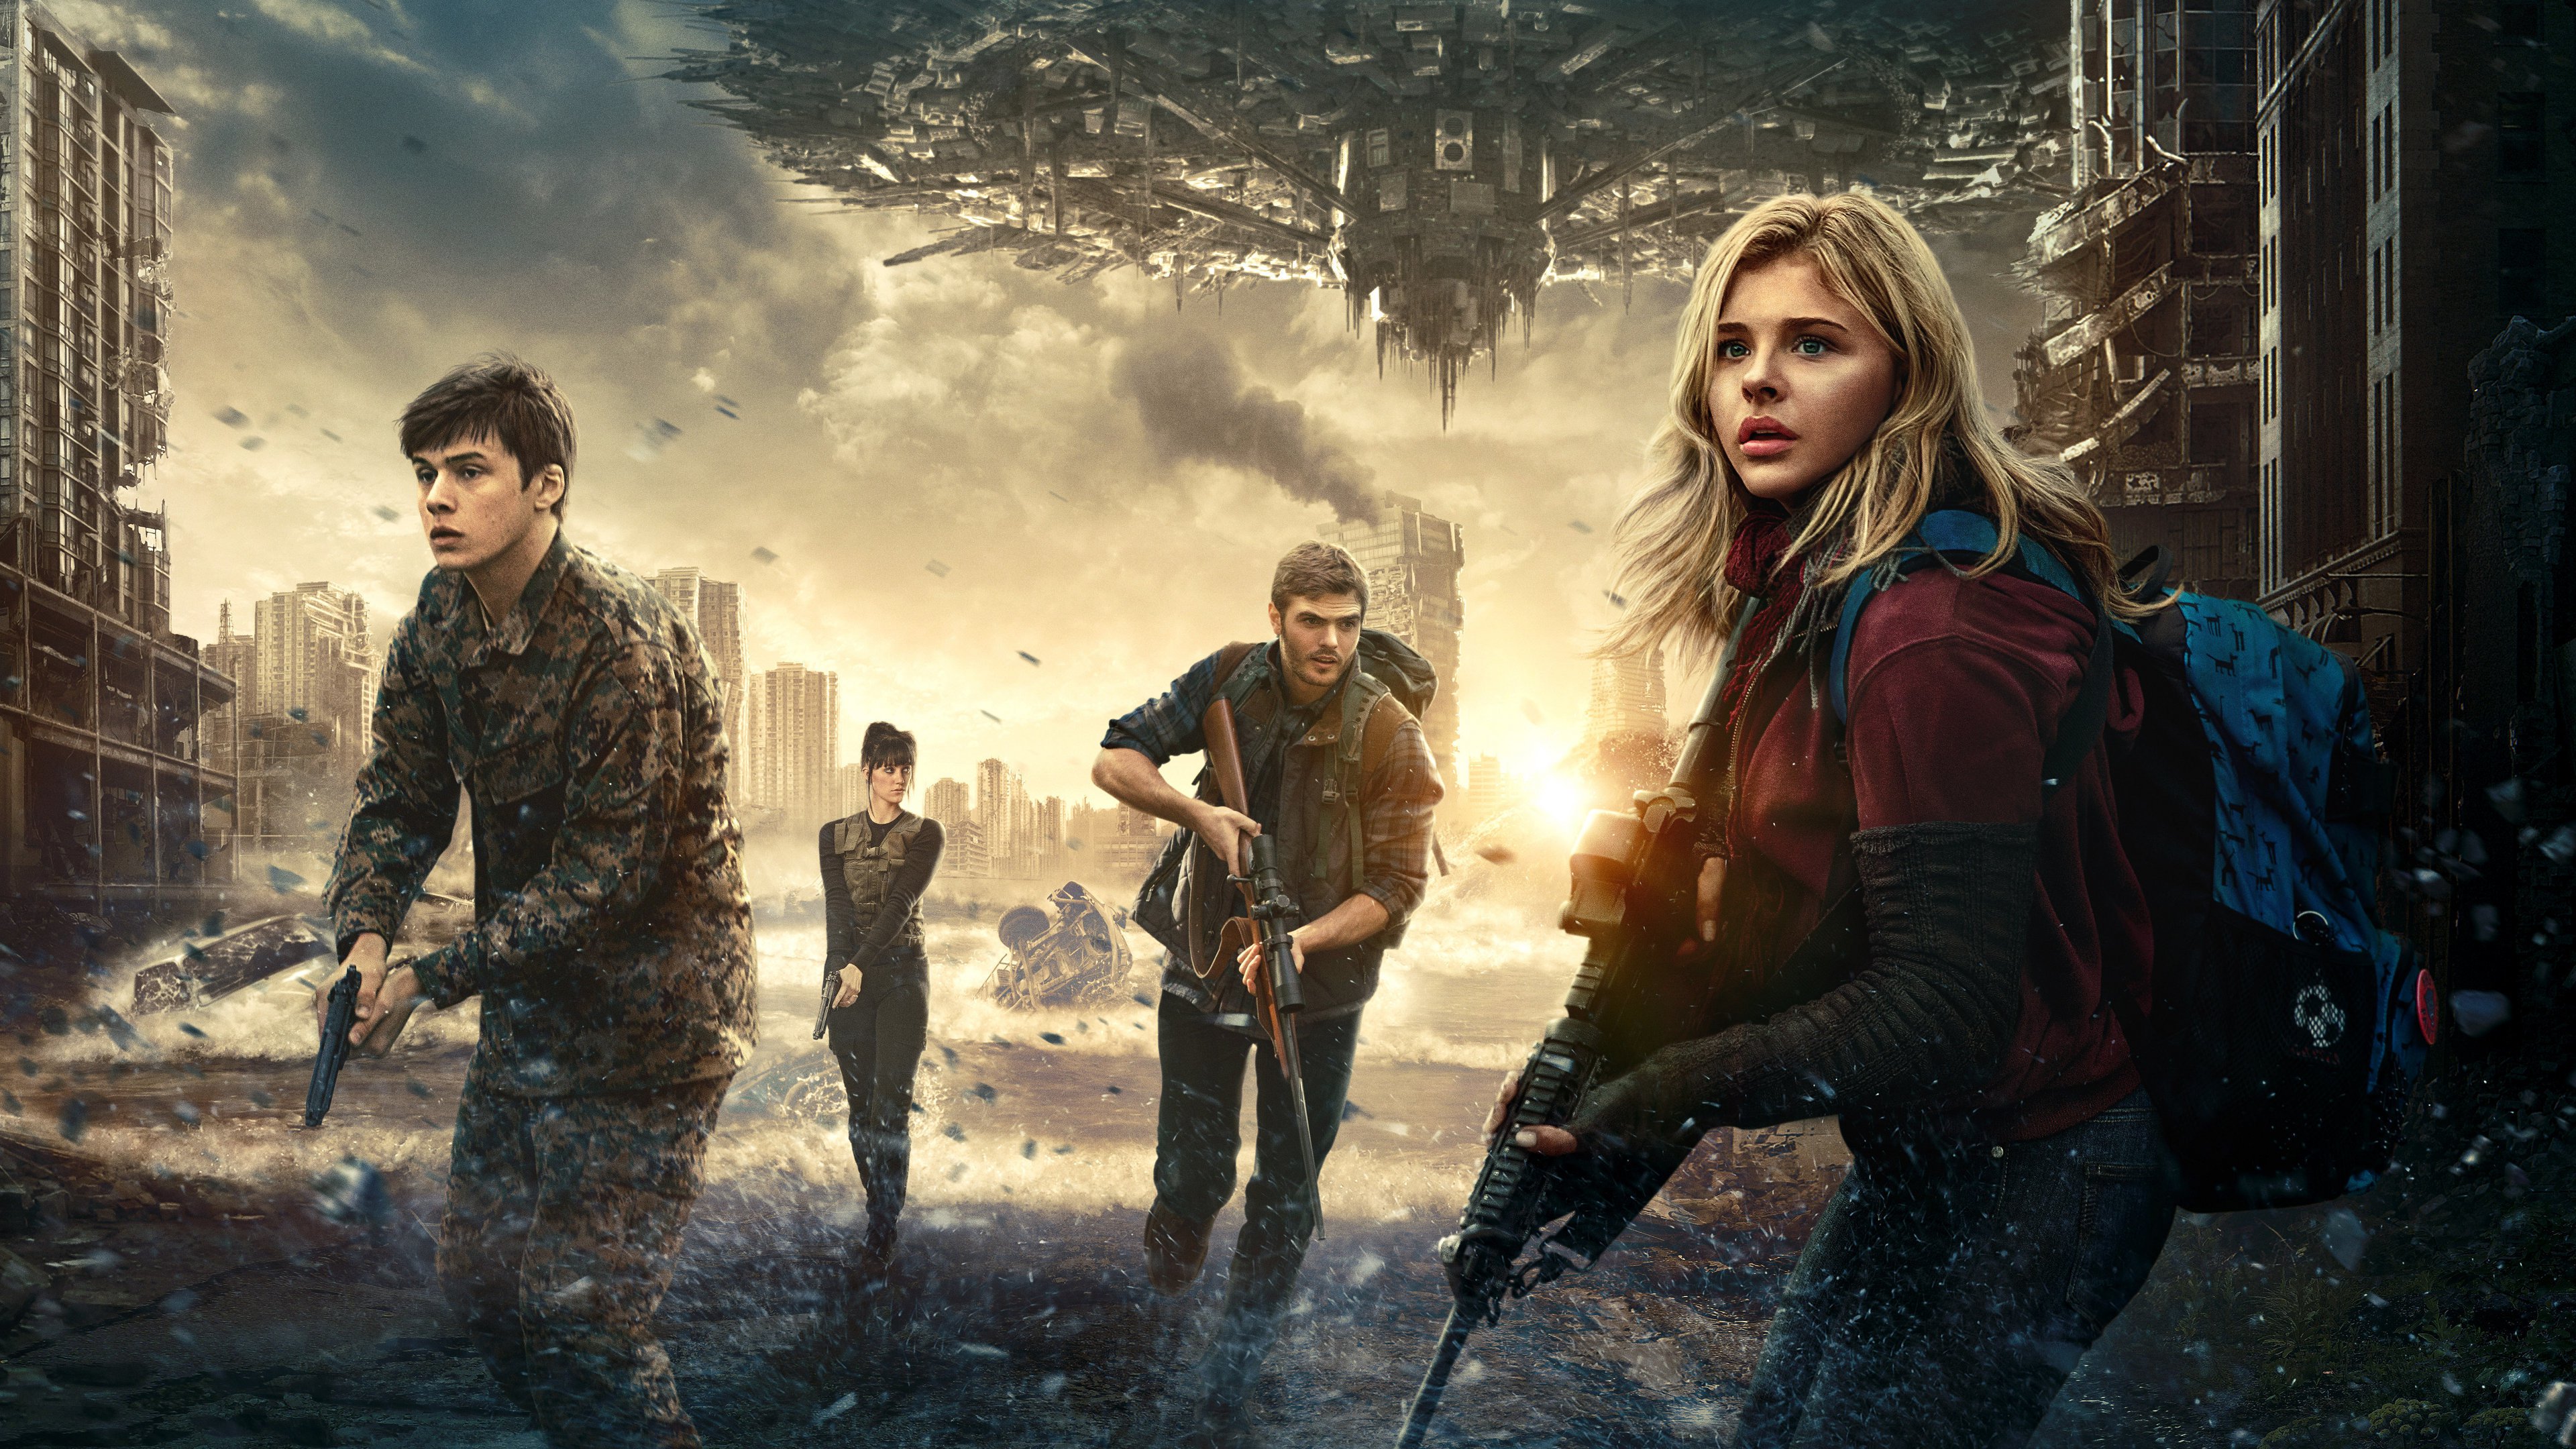 The 5th Wave 4k Ultra Hd Wallpaper - 5th Wave , HD Wallpaper & Backgrounds